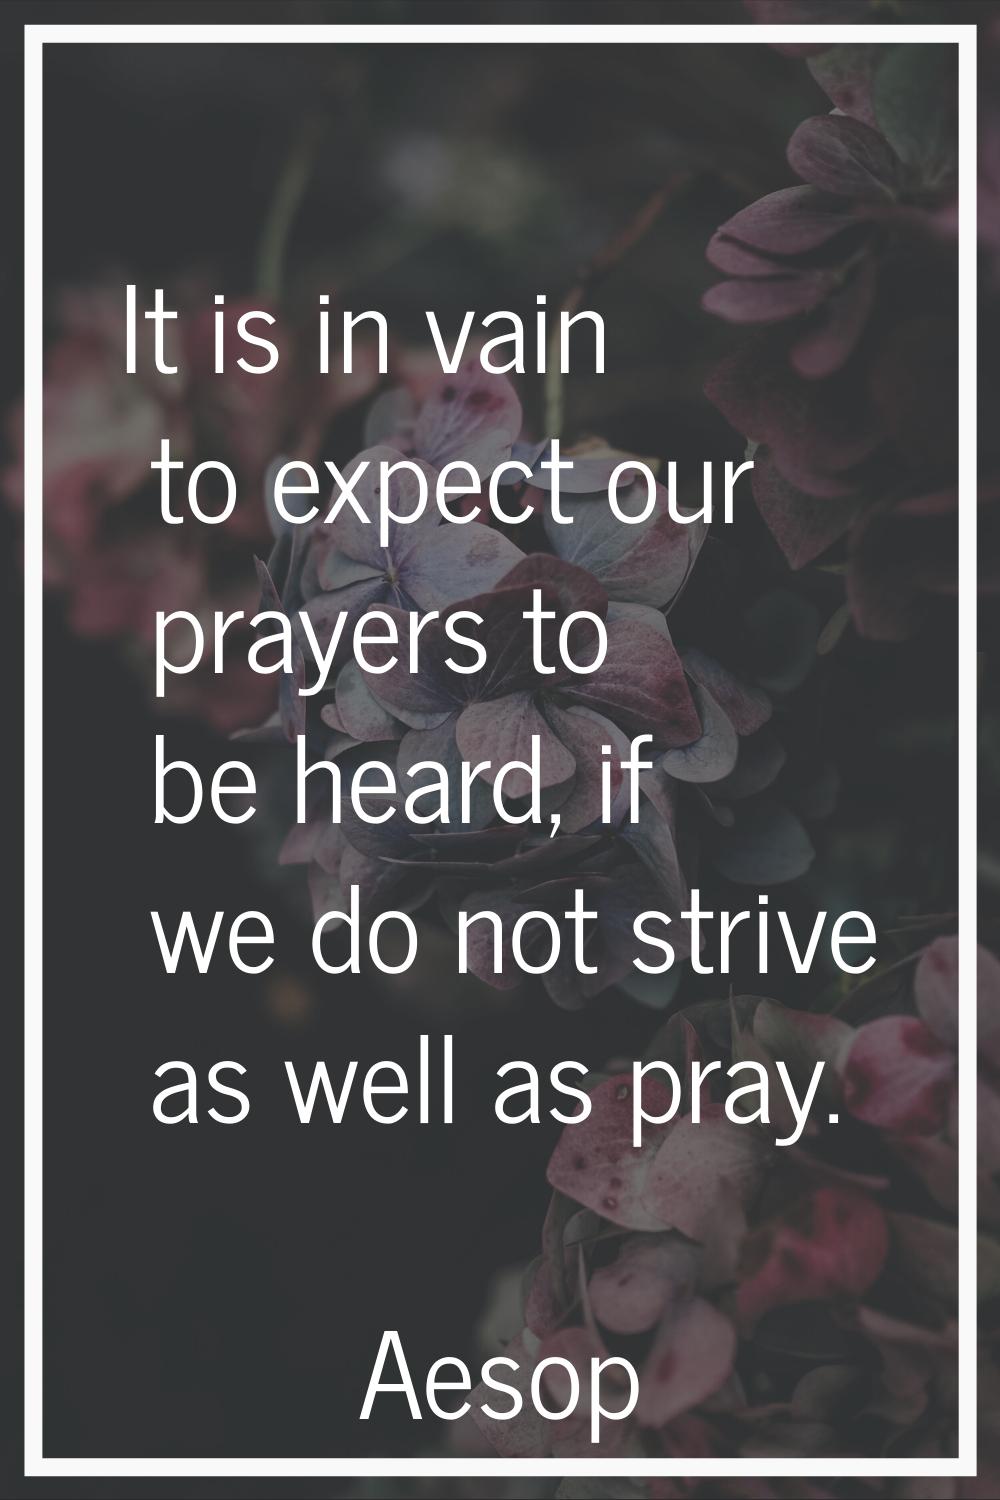 It is in vain to expect our prayers to be heard, if we do not strive as well as pray.